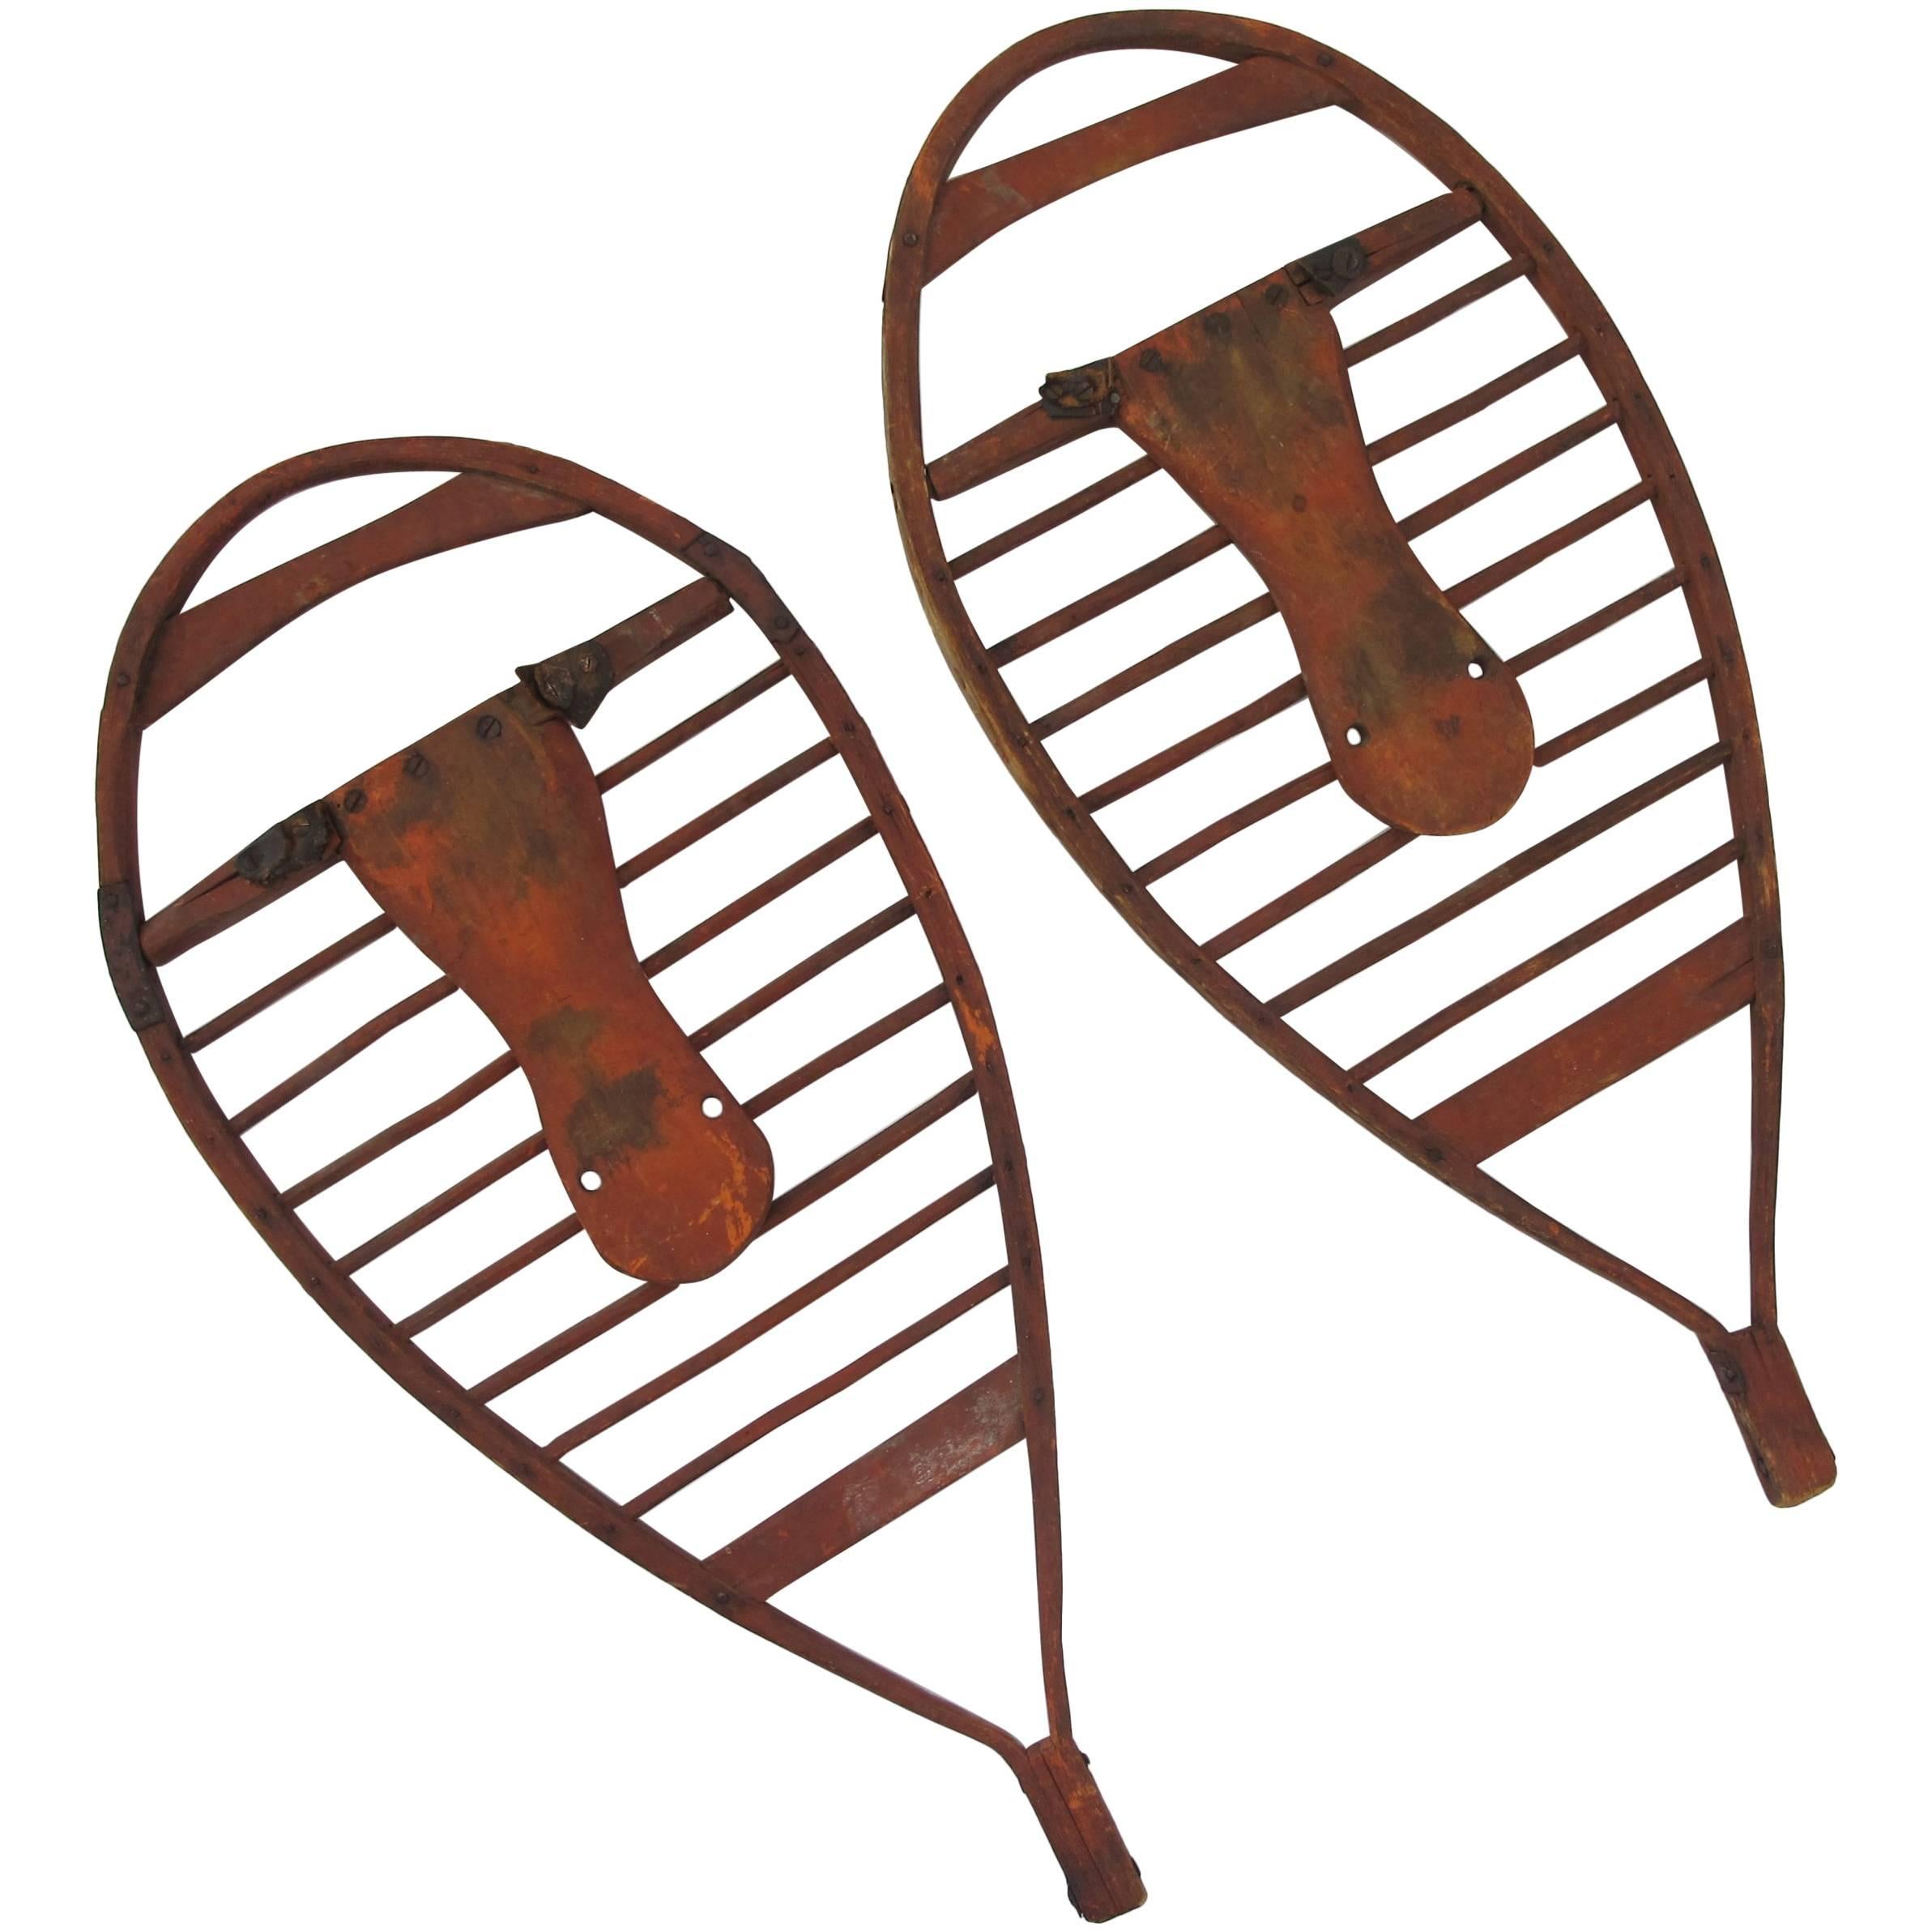 Early Graphic Wood Snowshoes For Sale